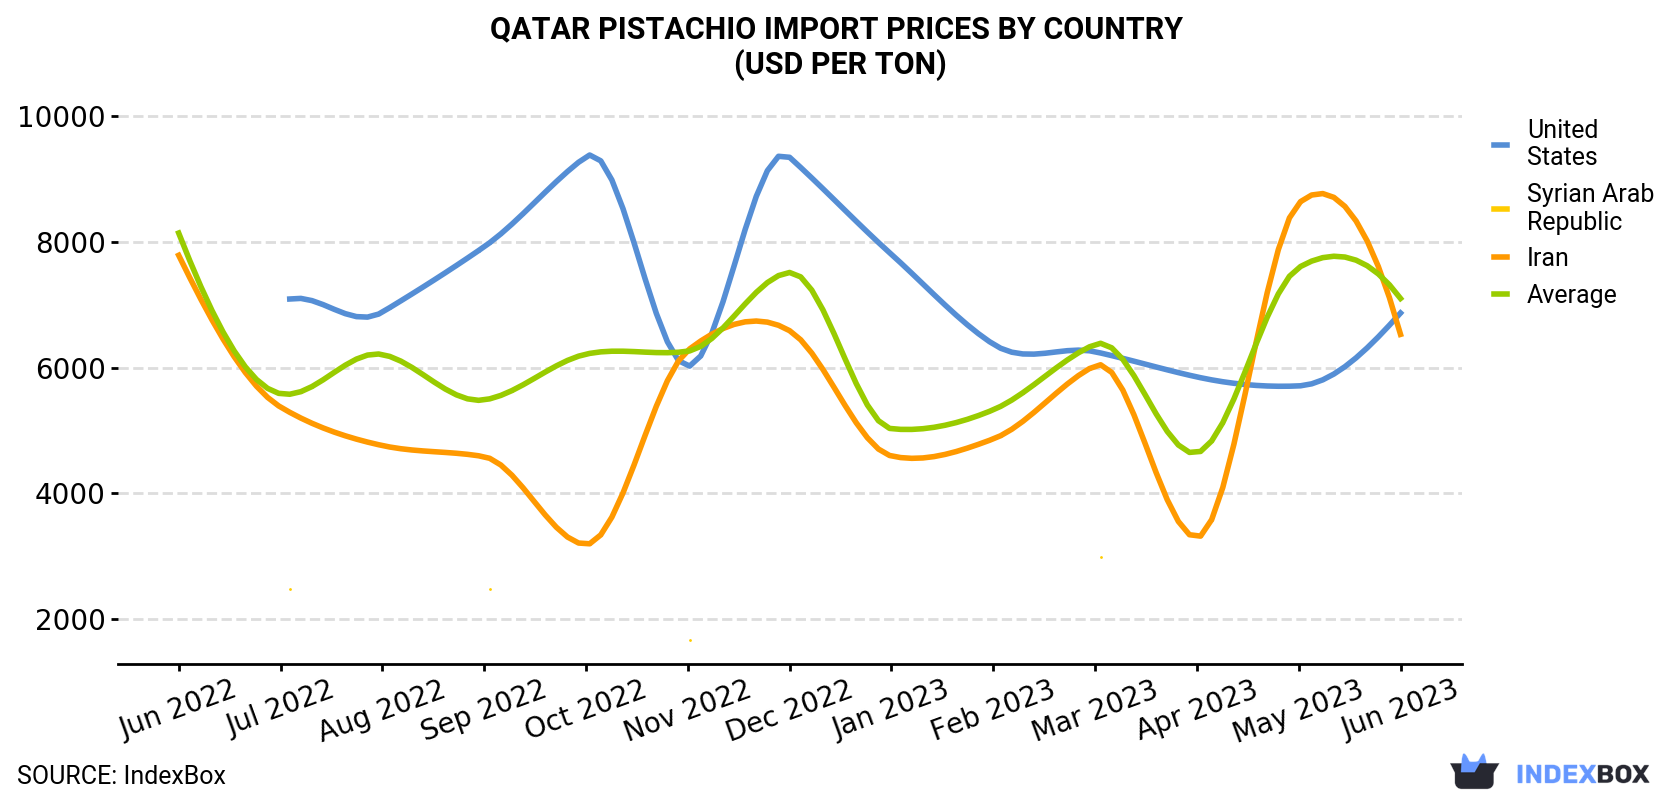 Qatar Pistachio Import Prices By Country (USD Per Ton)